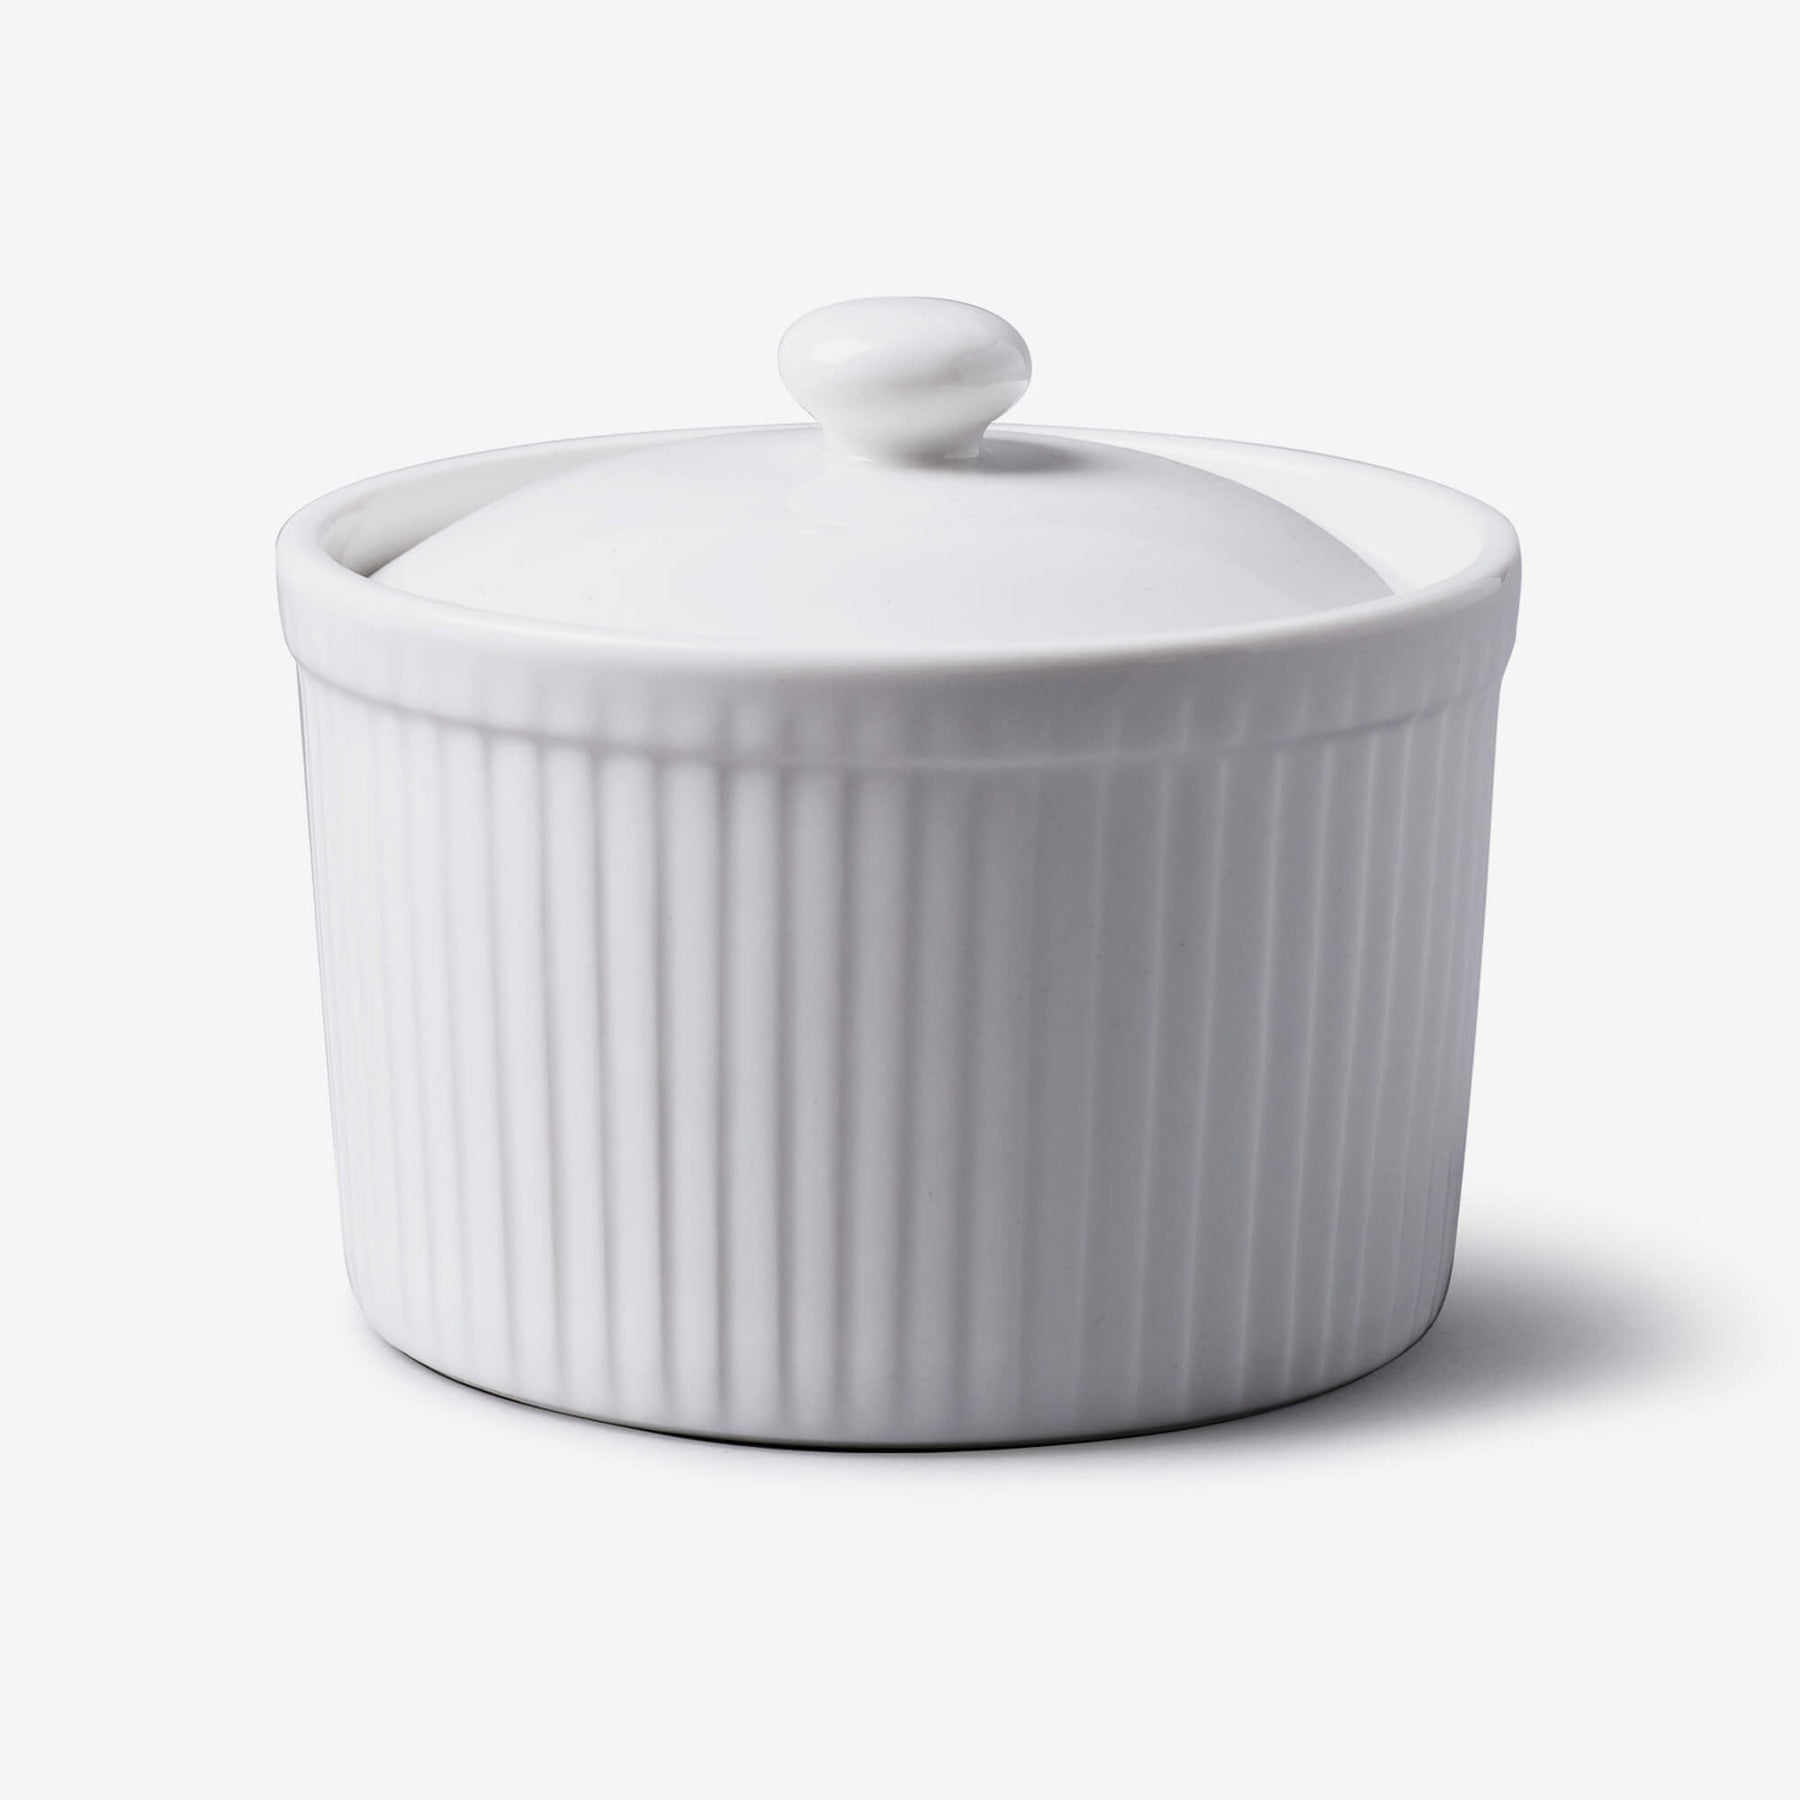 Porcelain Ramekin with Lid, Available in 2 Sizes